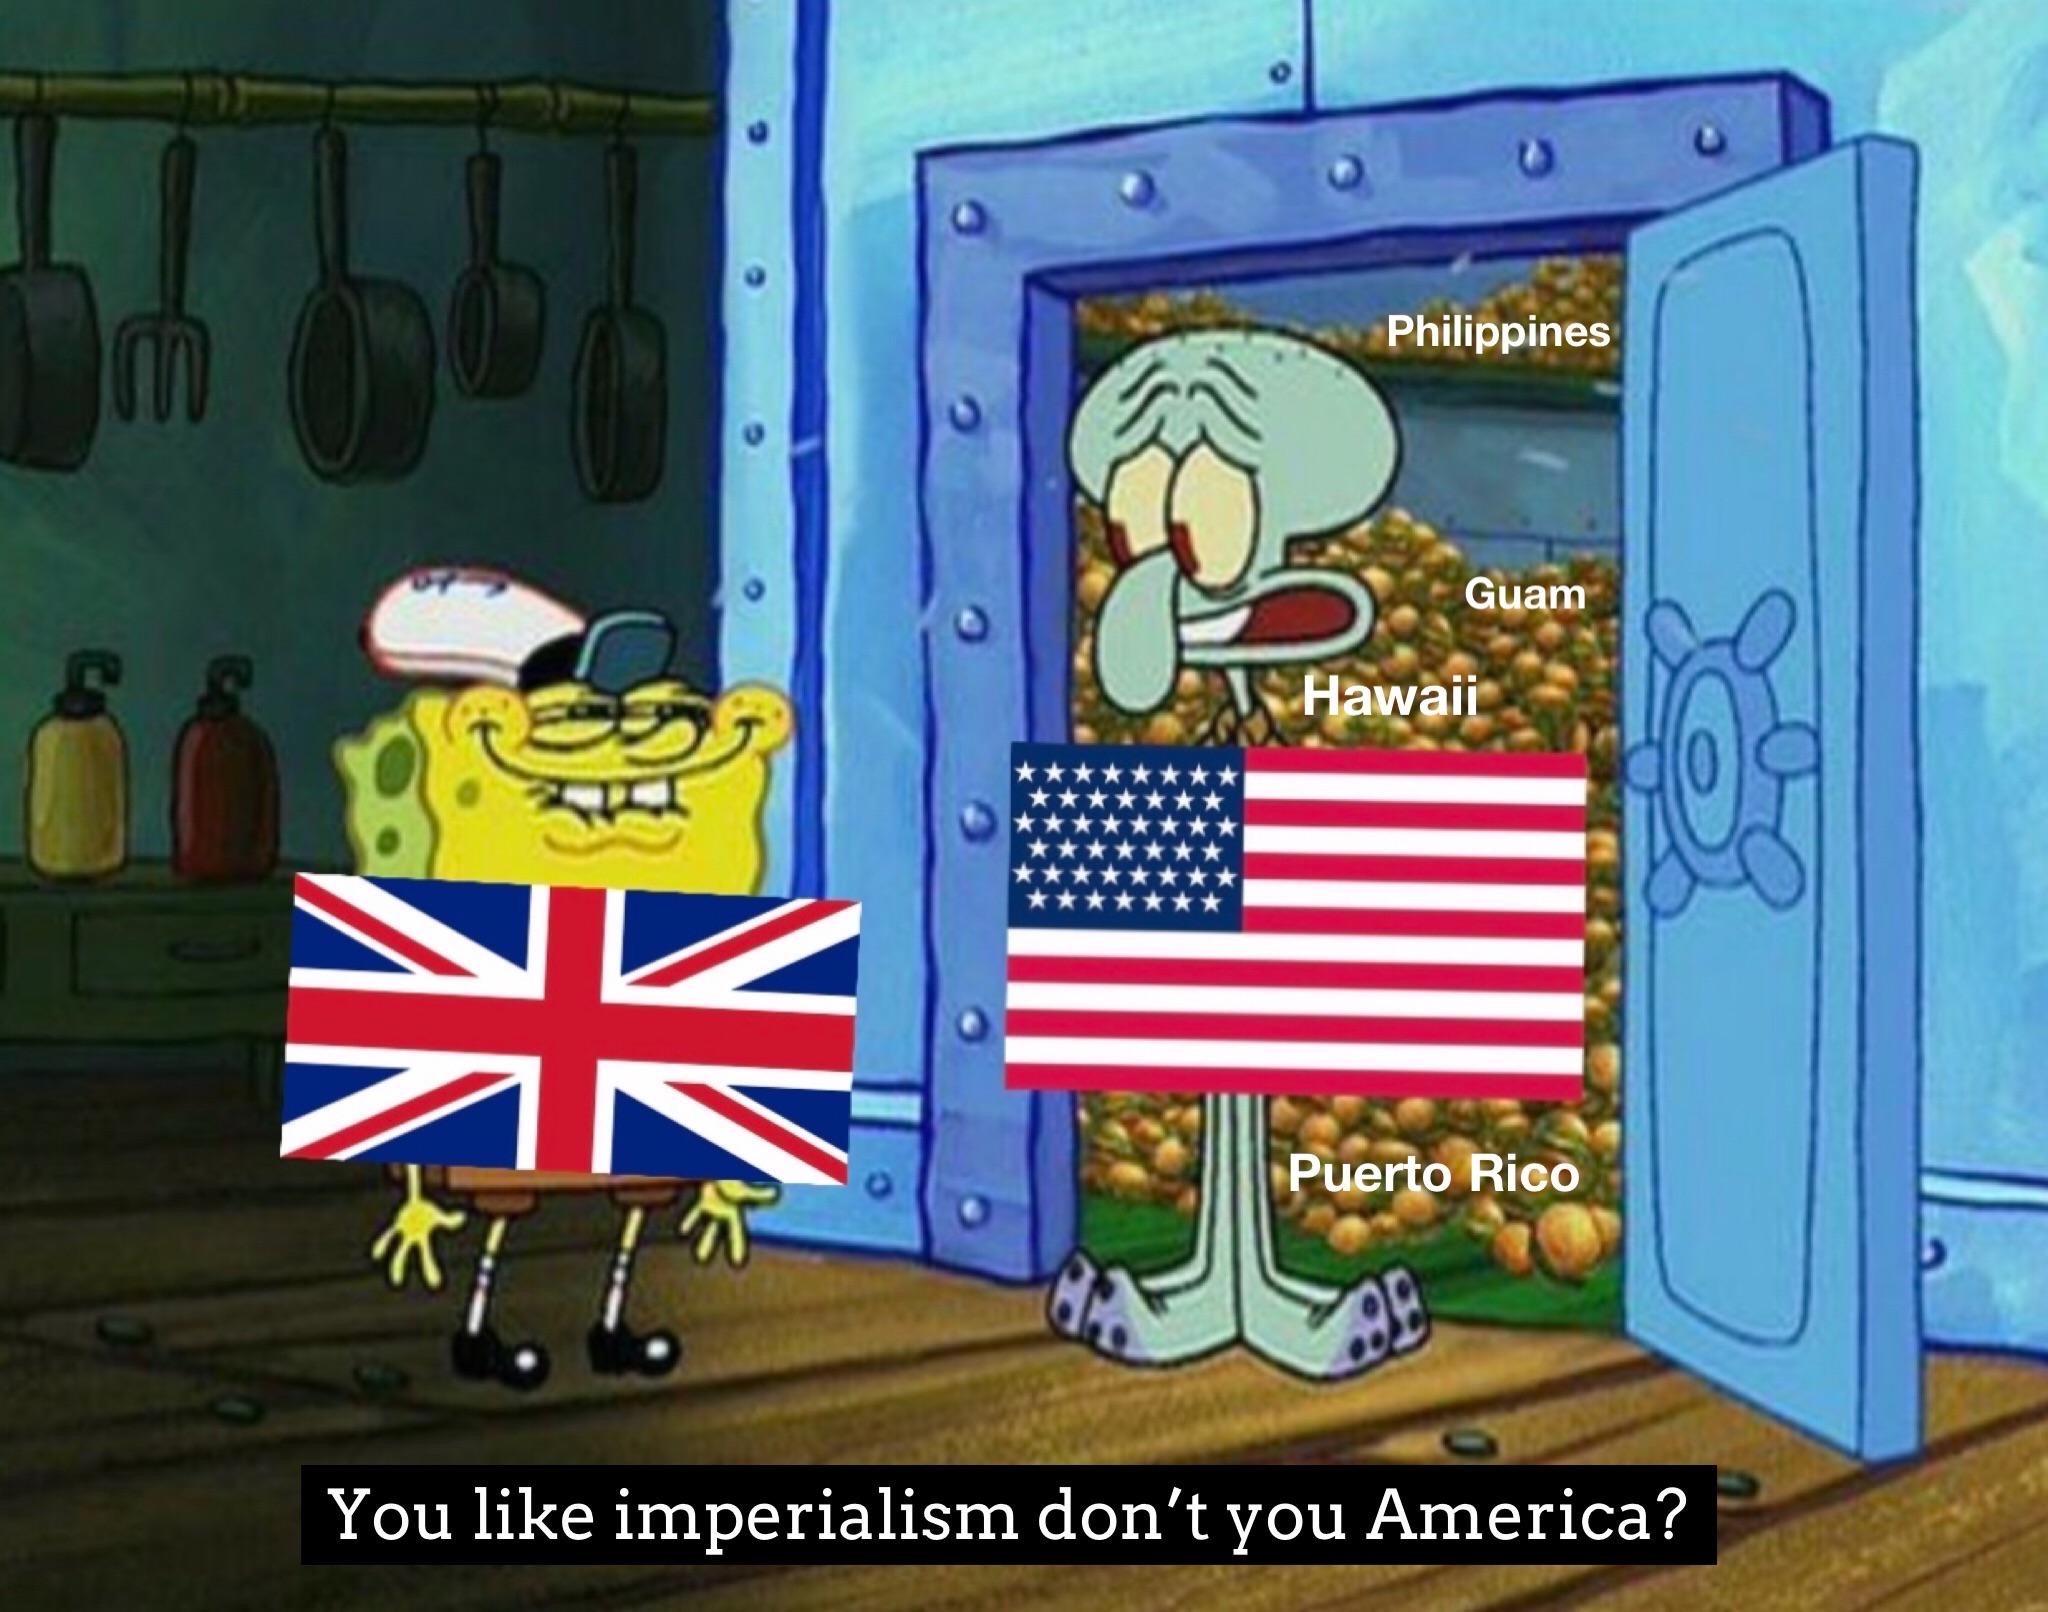 you like krabby patties don t you squidward episode - Philippines Guam Hawaii Puerto Rico You imperialism don't you America?